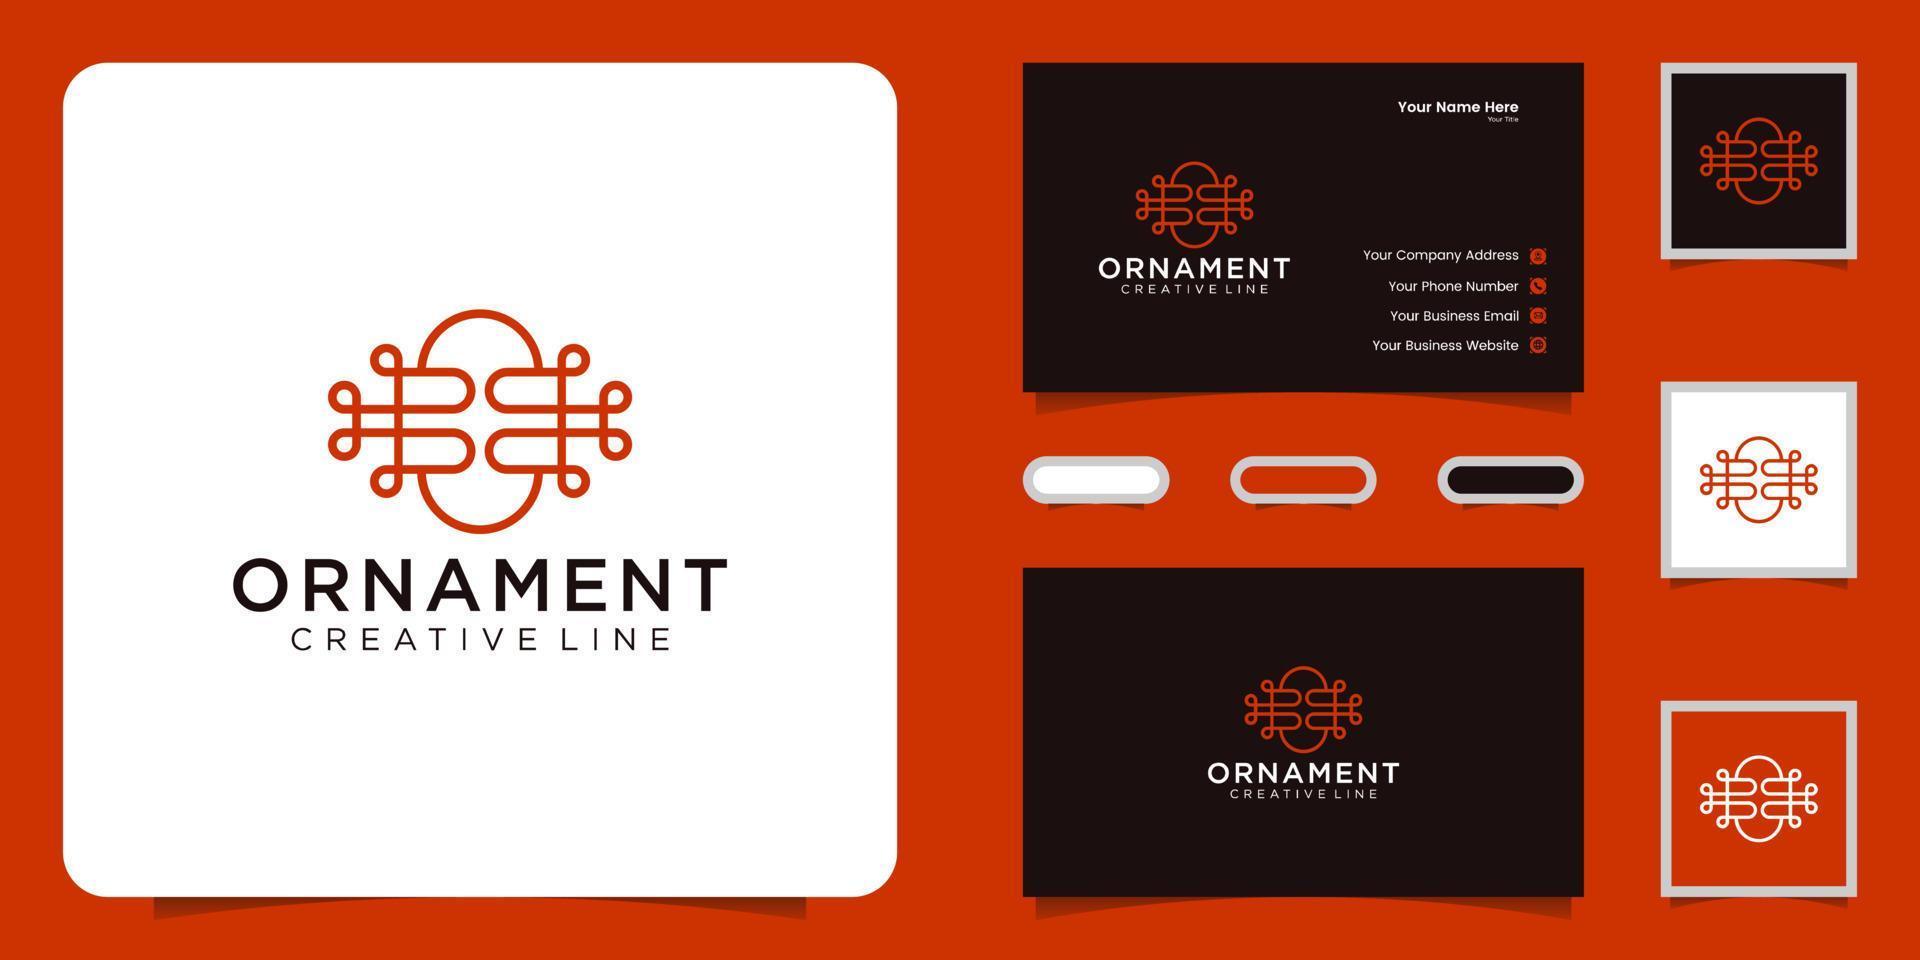 minimalist ornament logo design inspiration and business cards vector